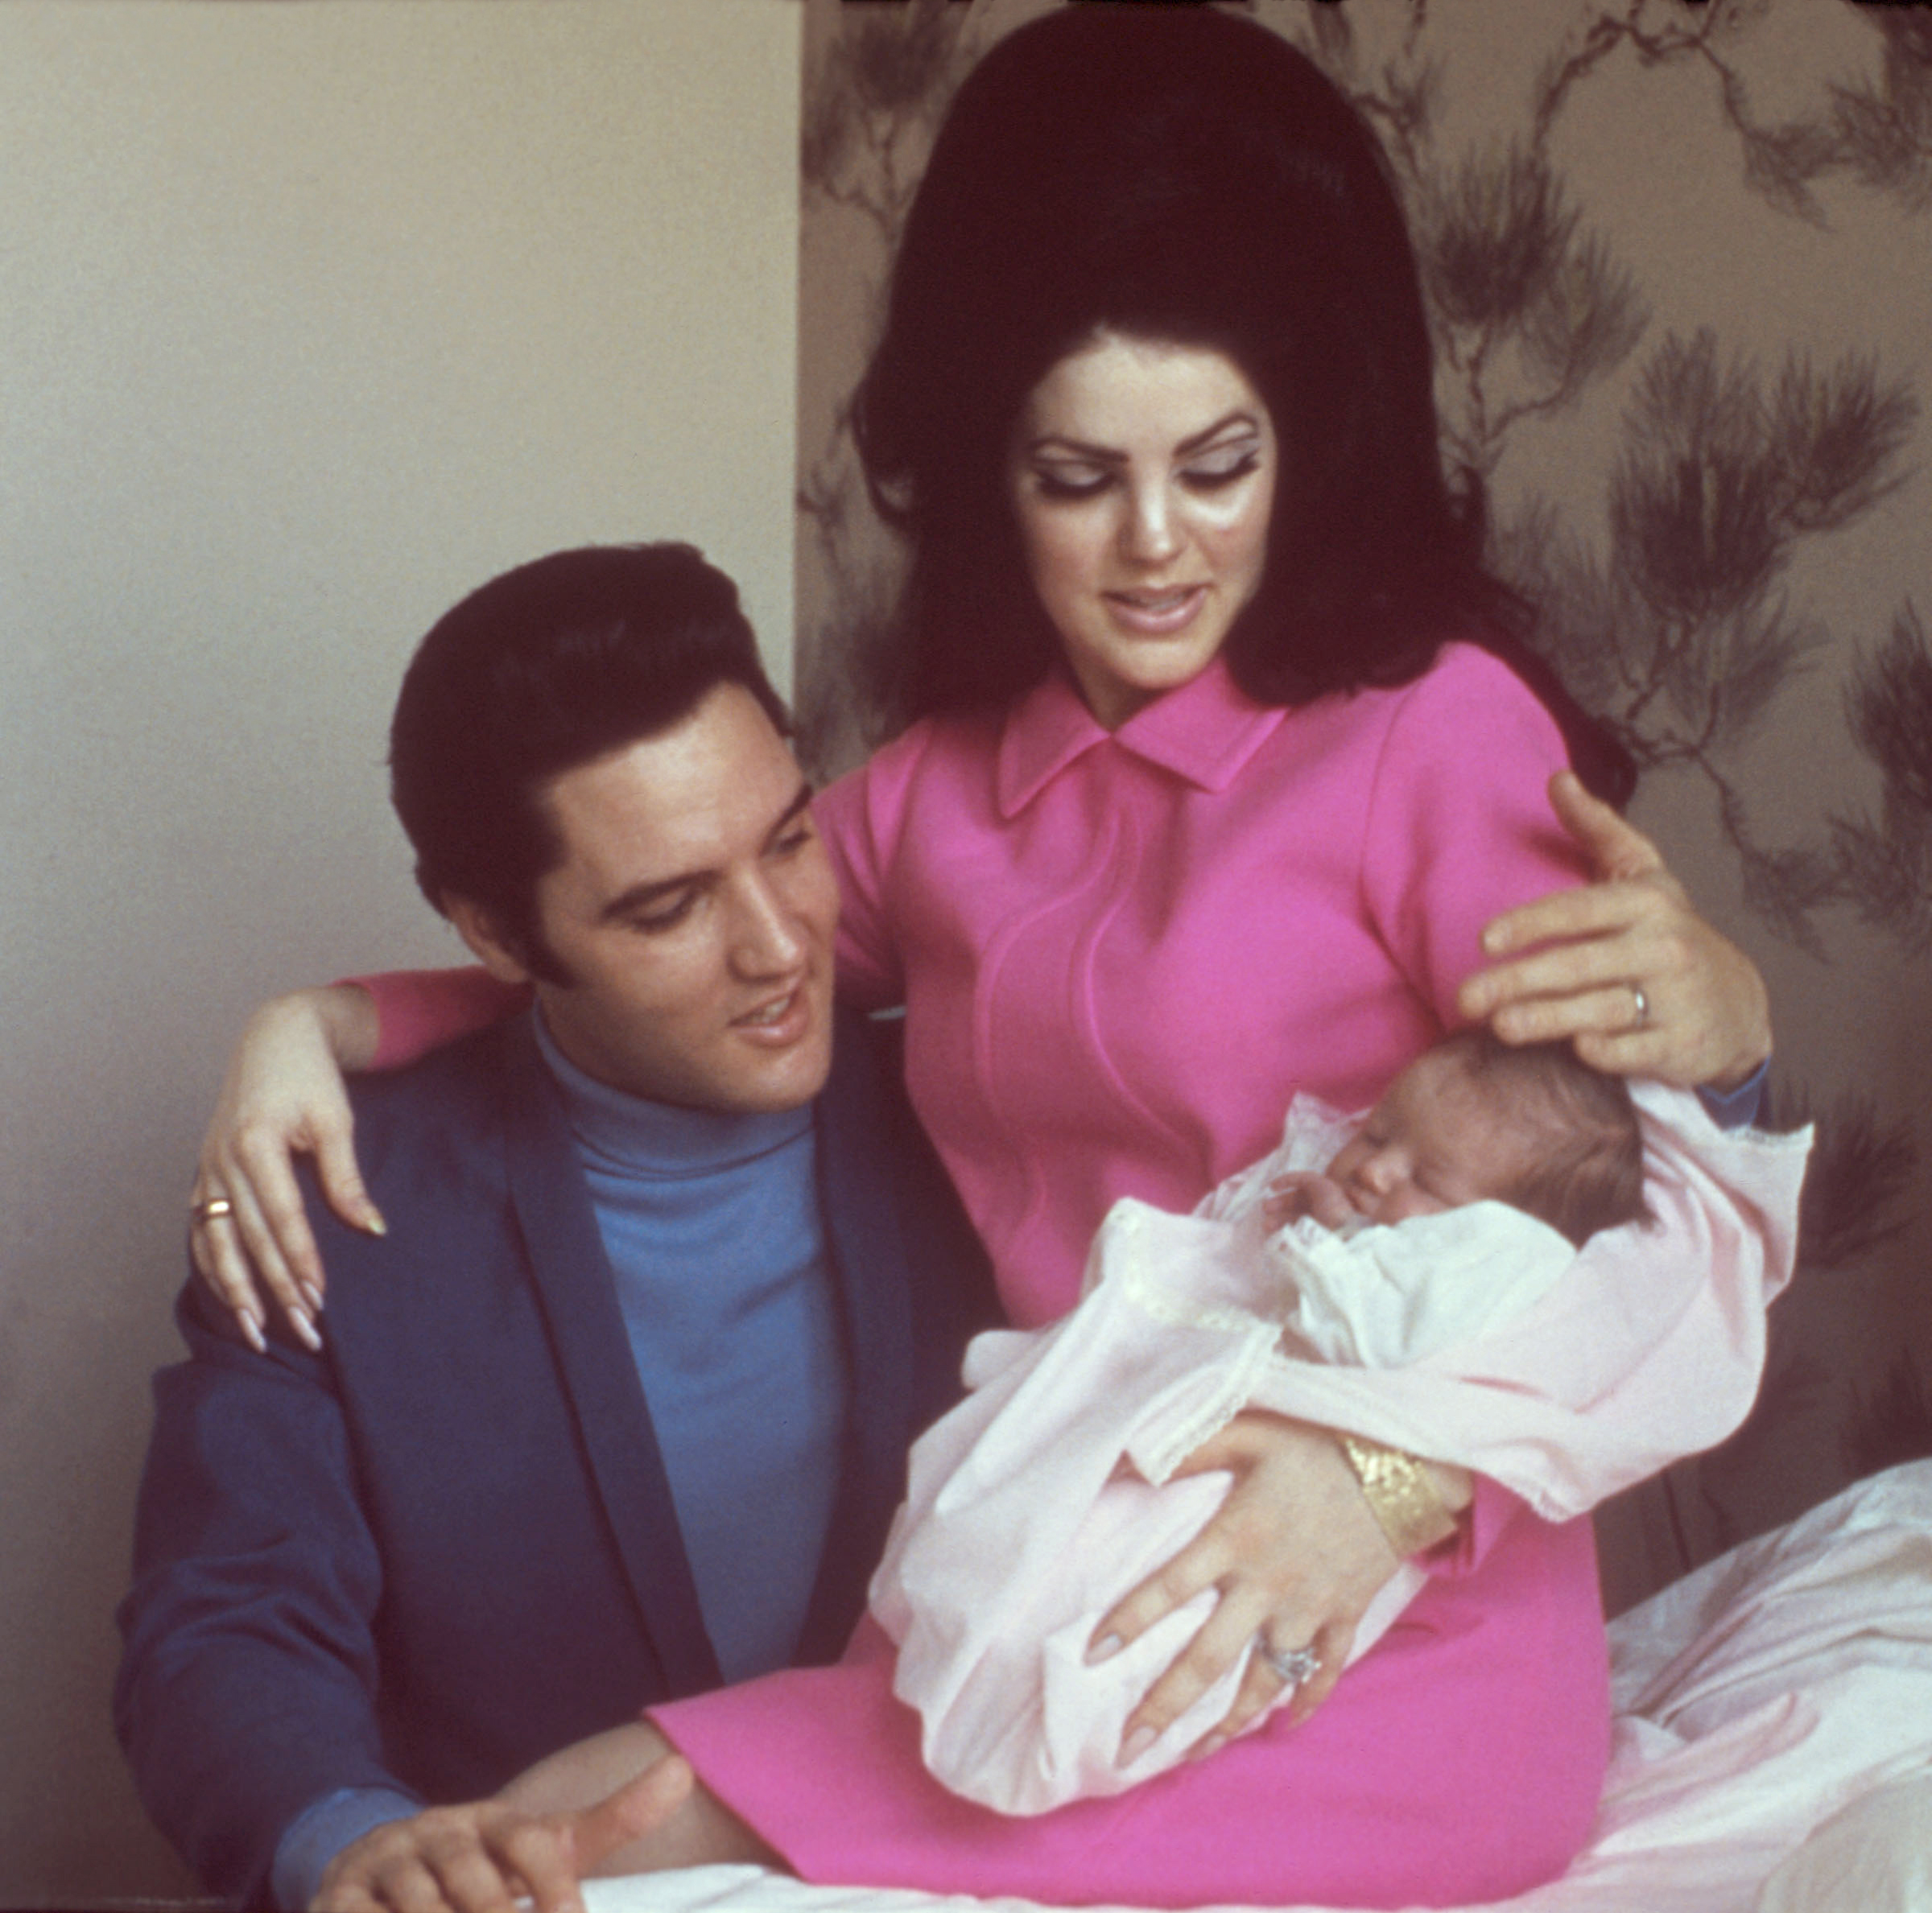 Elvis Presley with his ex-wife Priscilla Beaulieu and infant daughter Lisa Marie Presley in Memphis, Tennessee on February 5, 1968 | Source: Getty Images